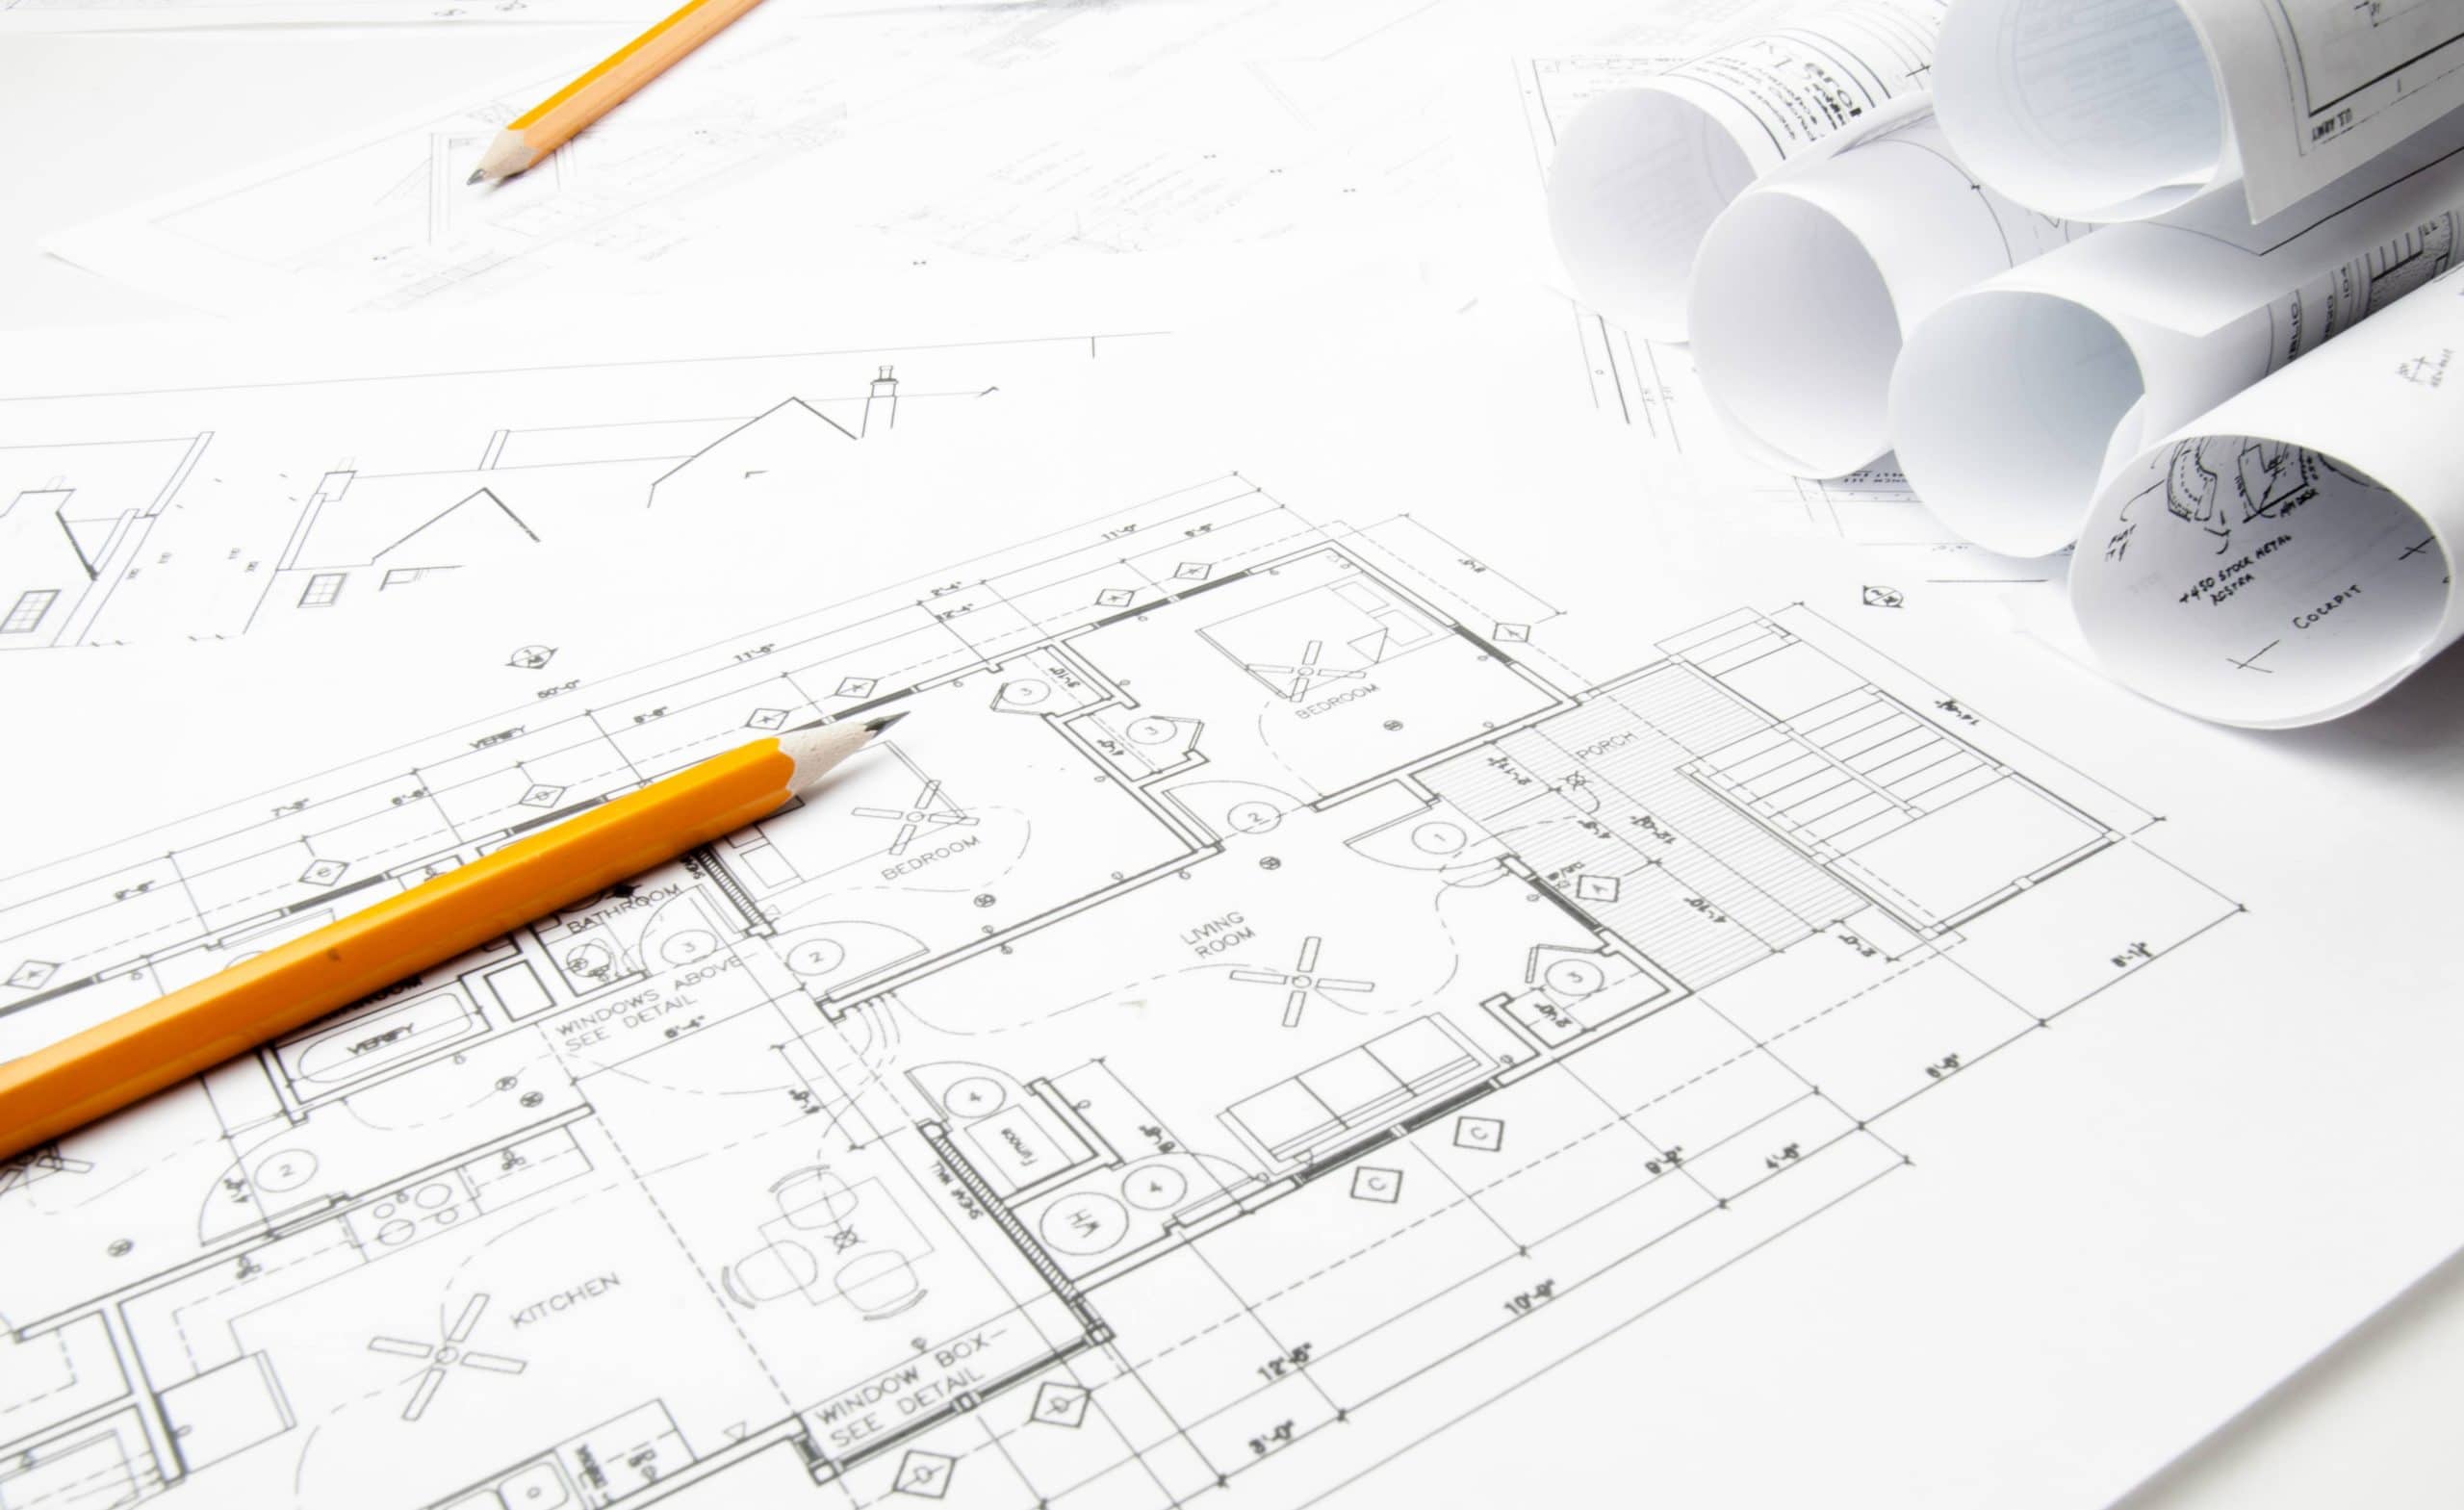 How to create architectural drawings